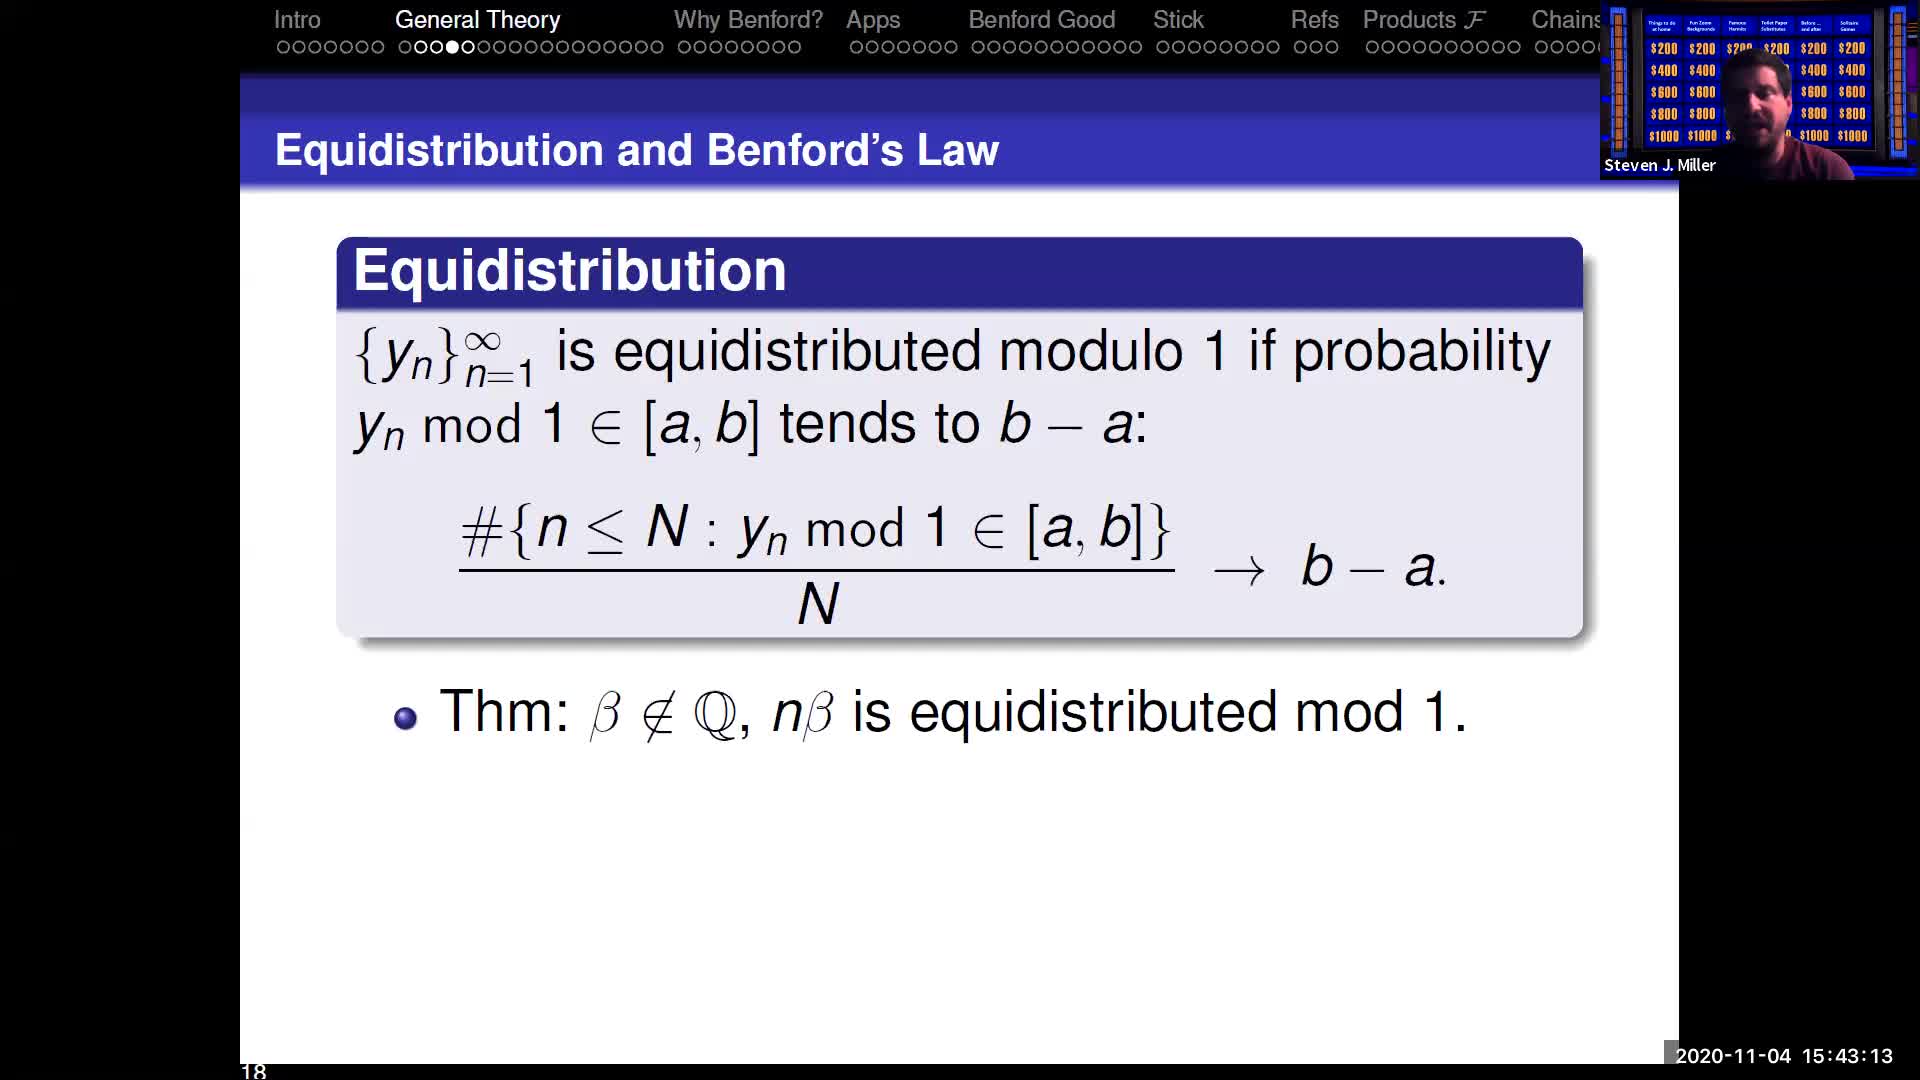 Pims Unbc Distinguished Colloquium Benford S Law Why The Irs Might Care About The 3x 1 Problem And Zeta S Mathtube Org